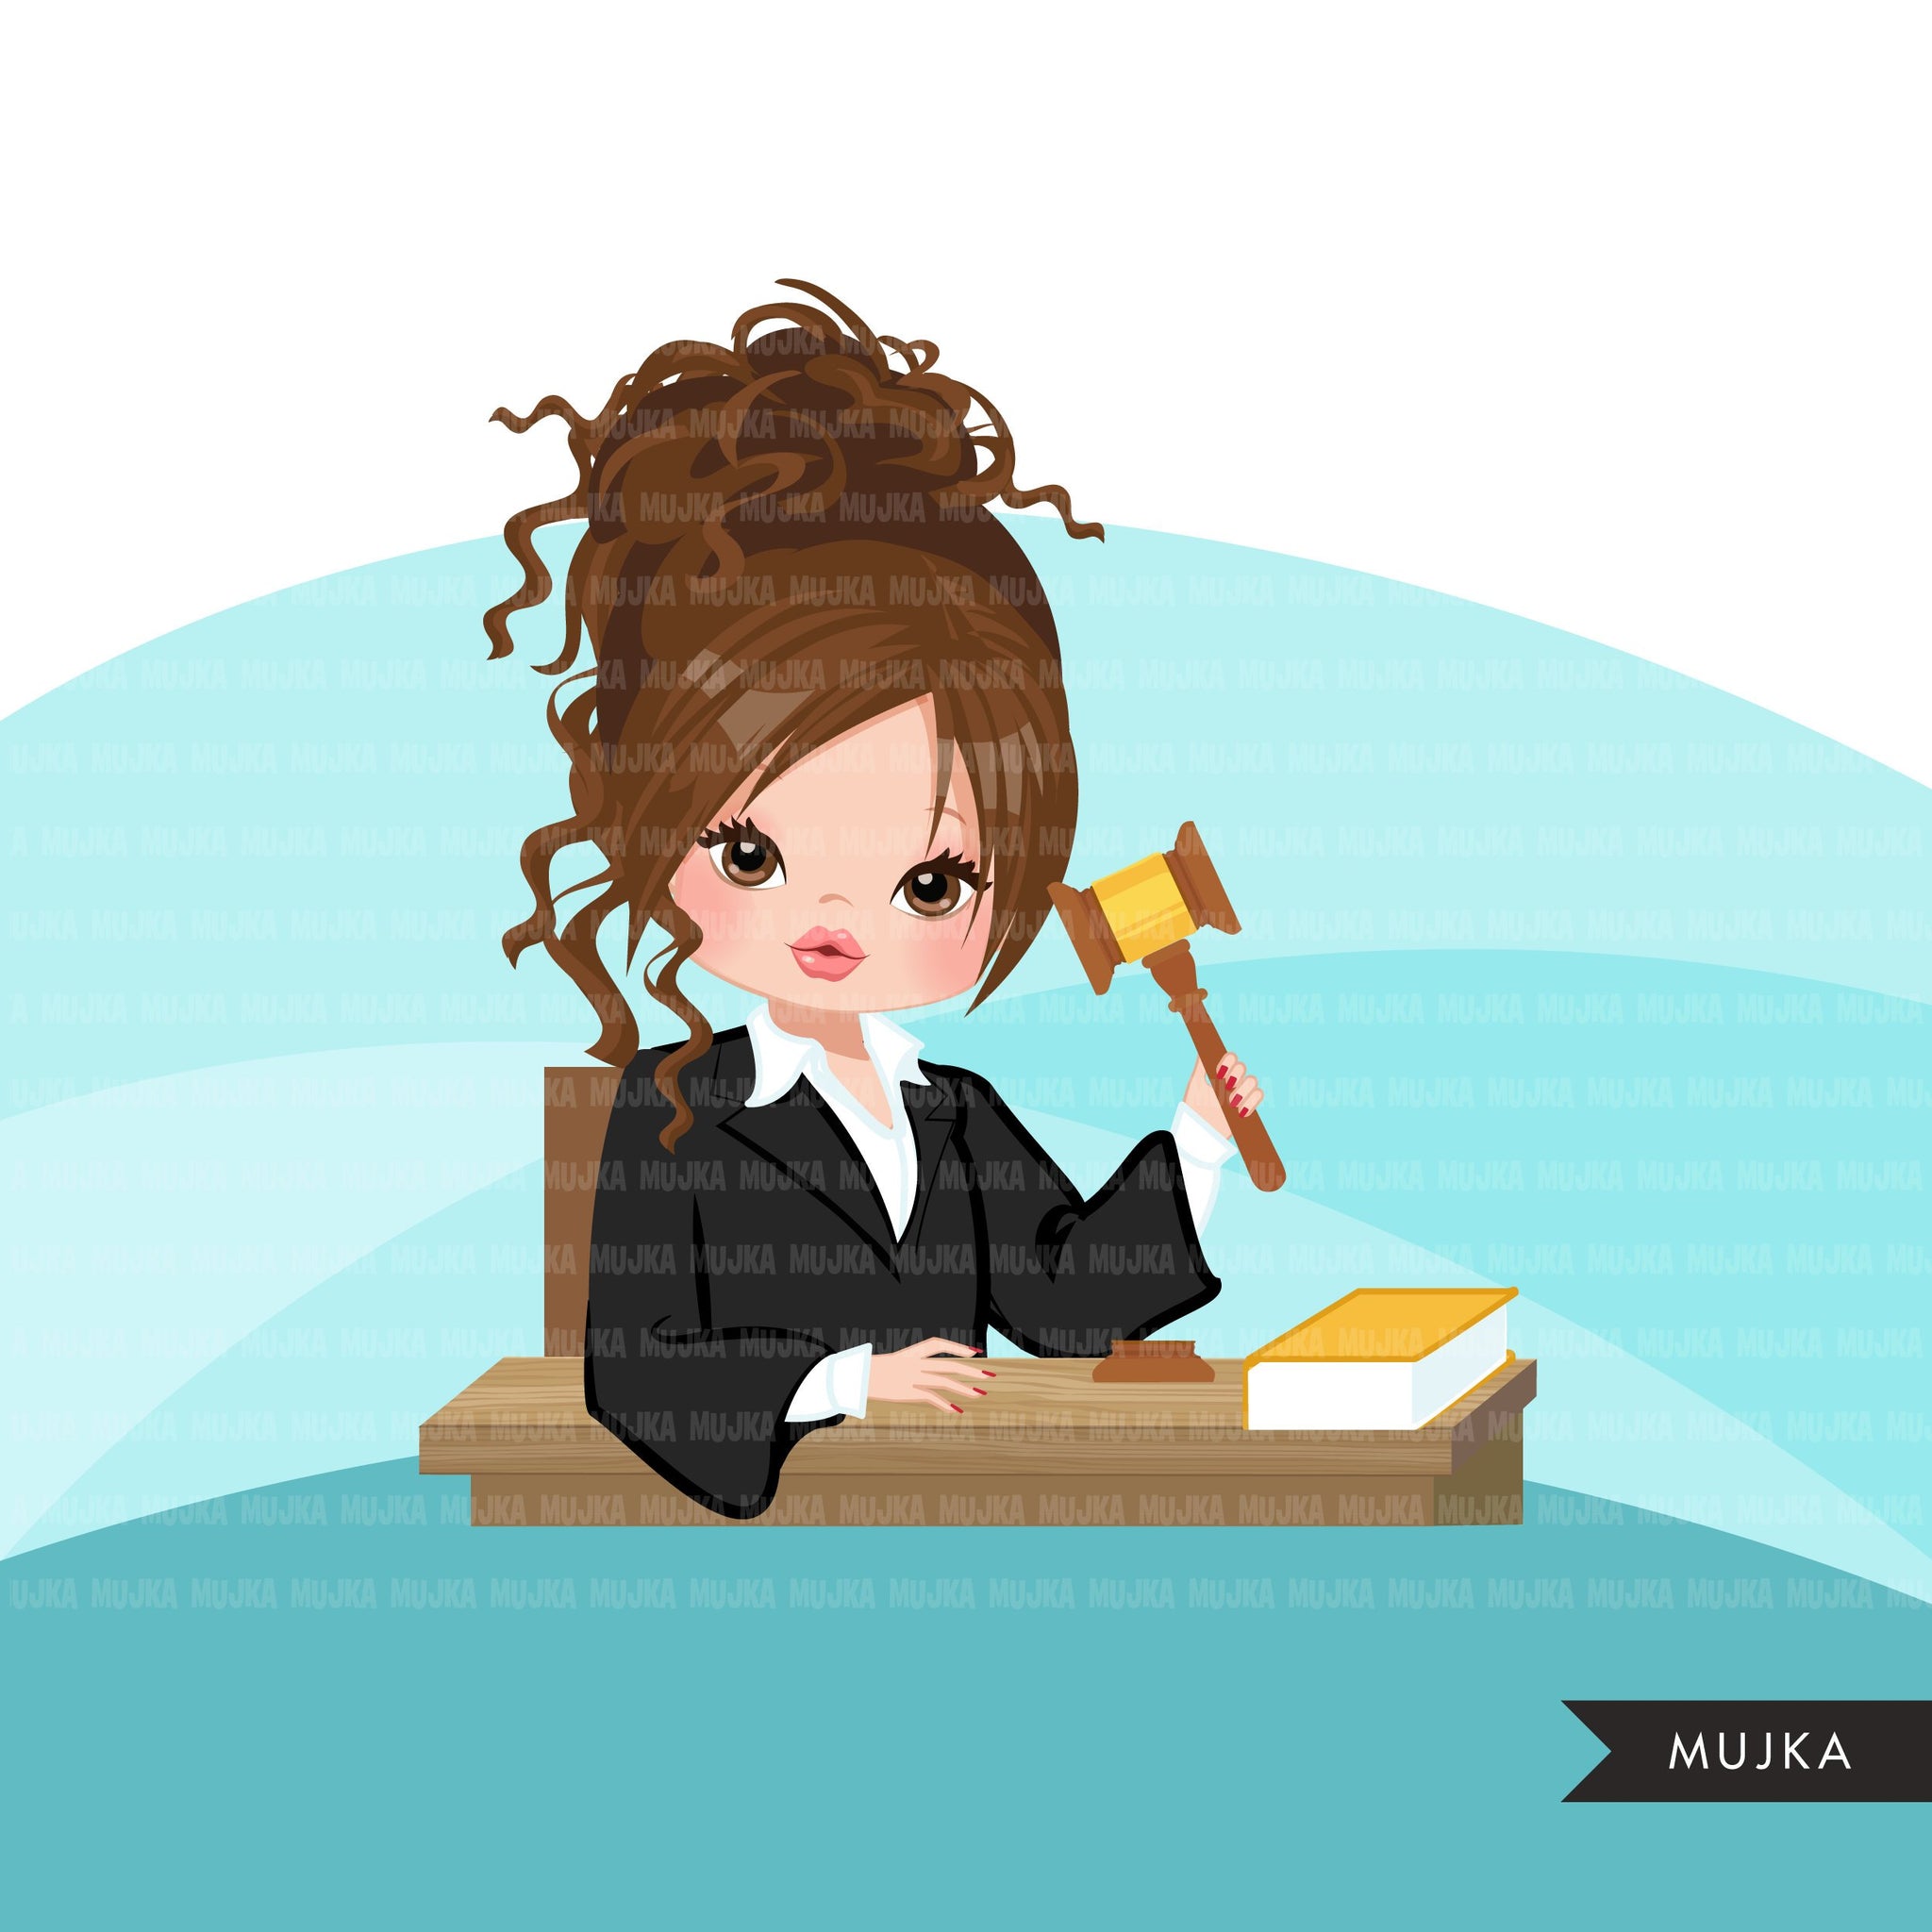 Woman Judge avatar clipart with gavel and law book, print and cut, justice girl clip art, court of law